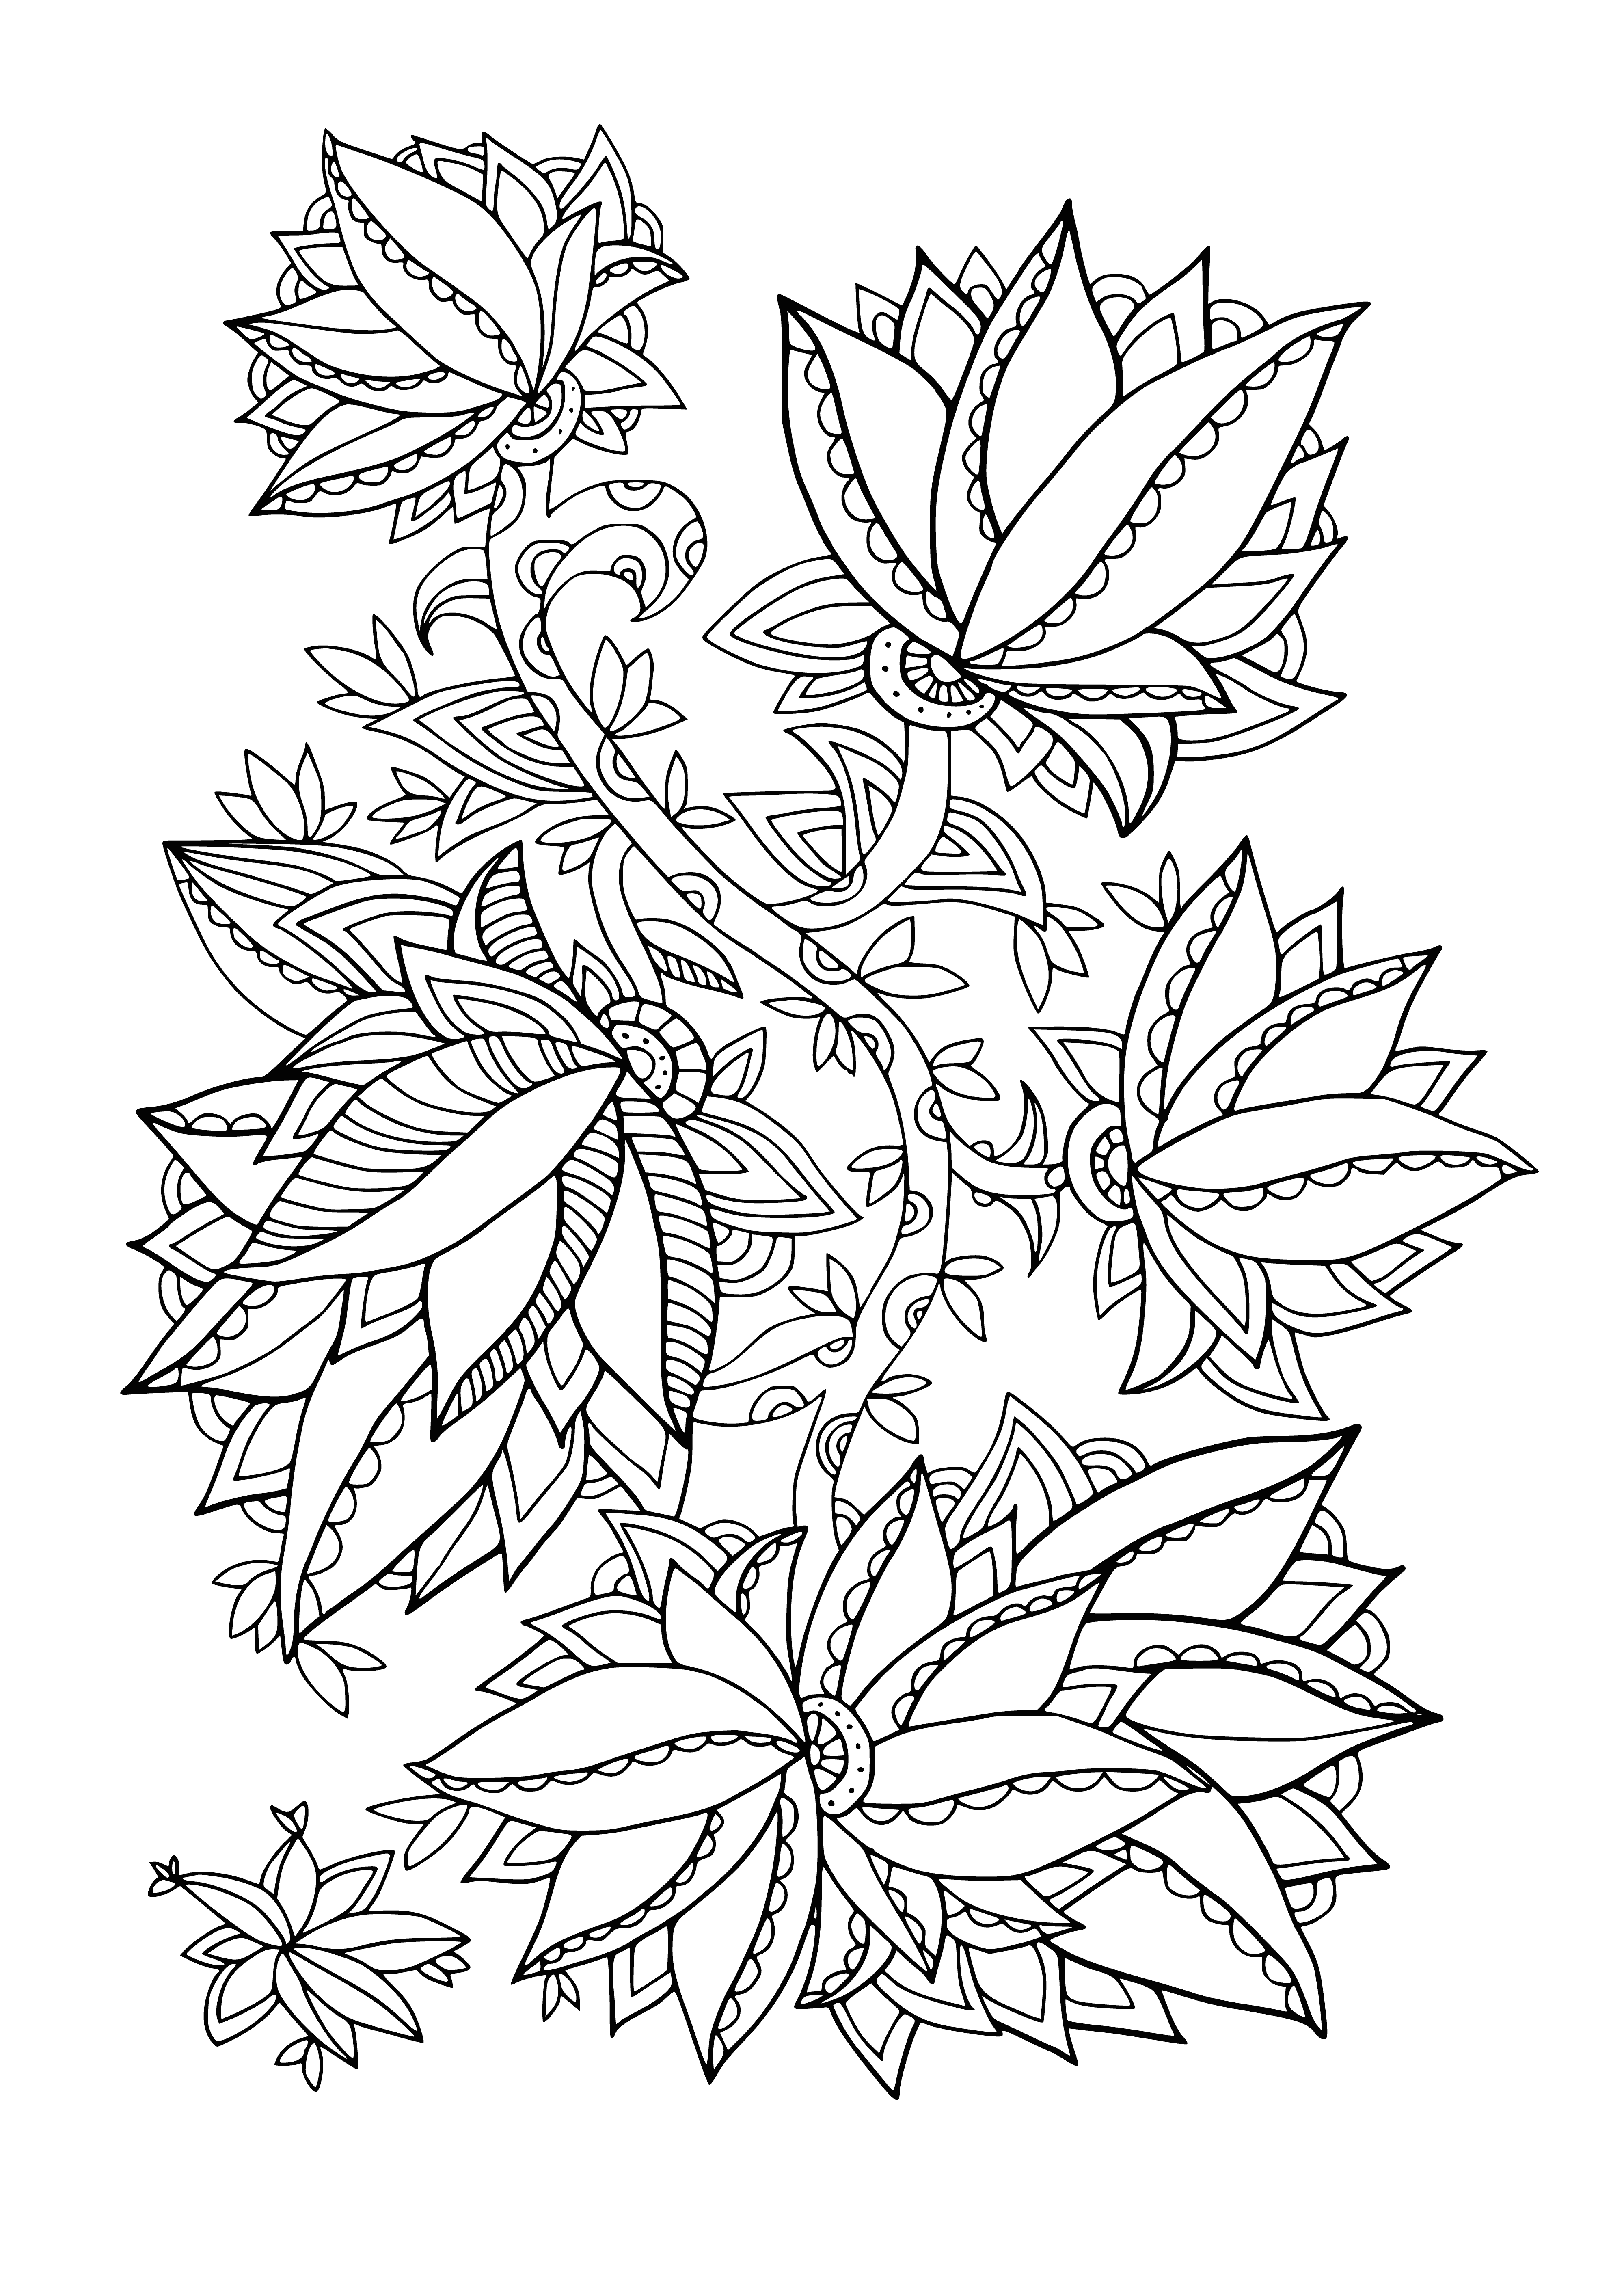 coloring page: Beautiful bouquet of flowers in a variety of colors to bring a smile to your face! Download Adult Coloring Pages Flowers - Flowers.